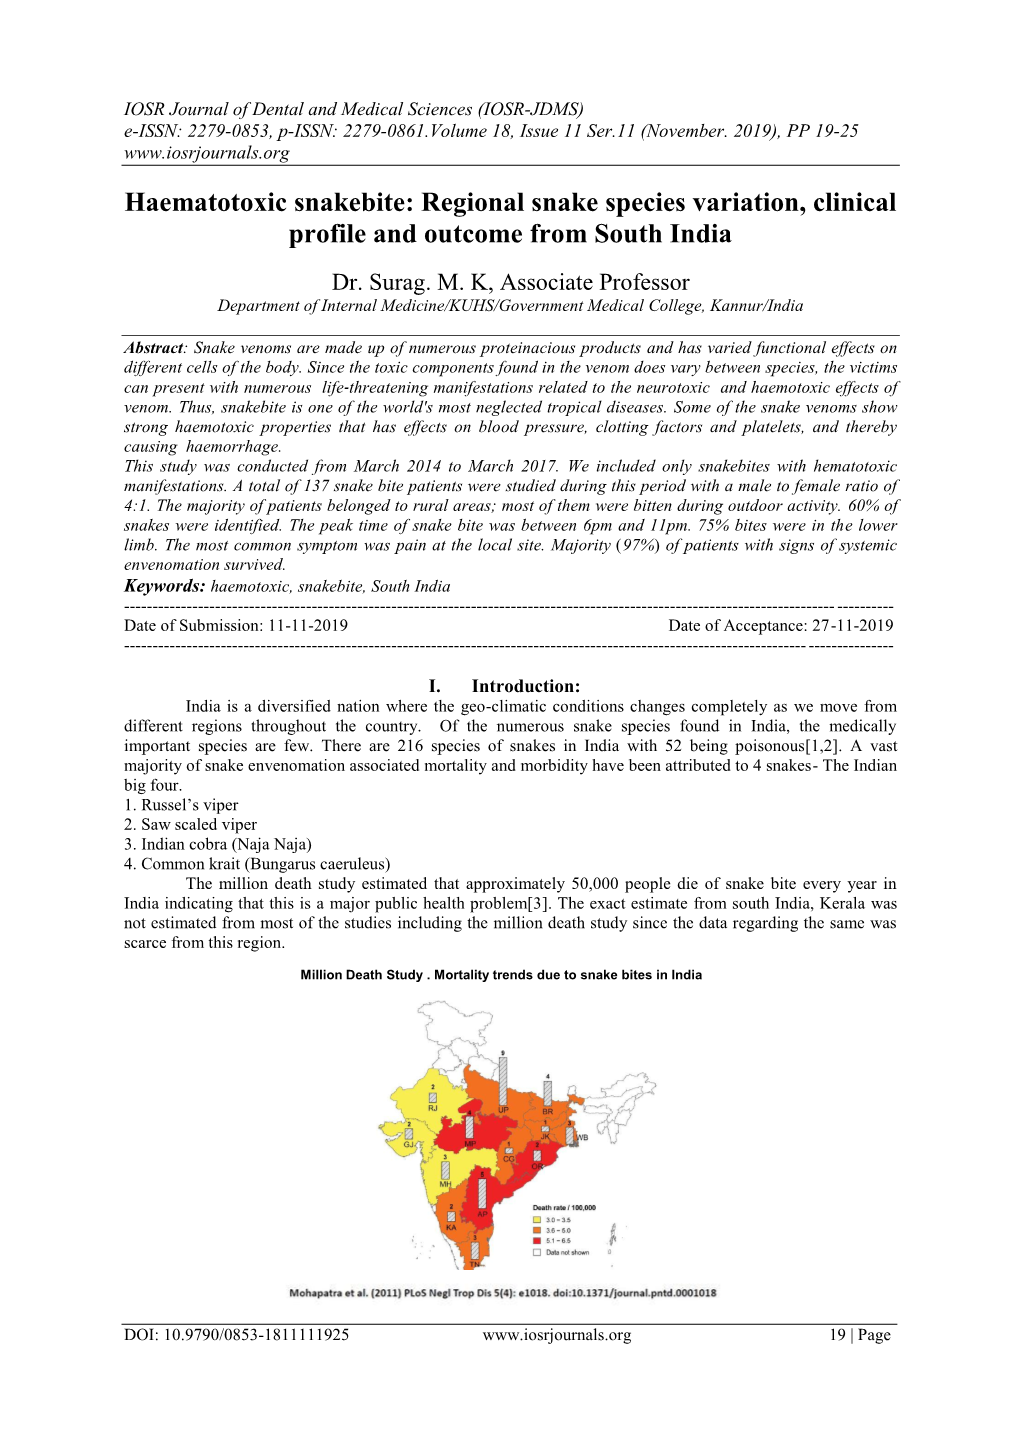 Haematotoxic Snakebite: Regional Snake Species Variation, Clinical Profile and Outcome from South India